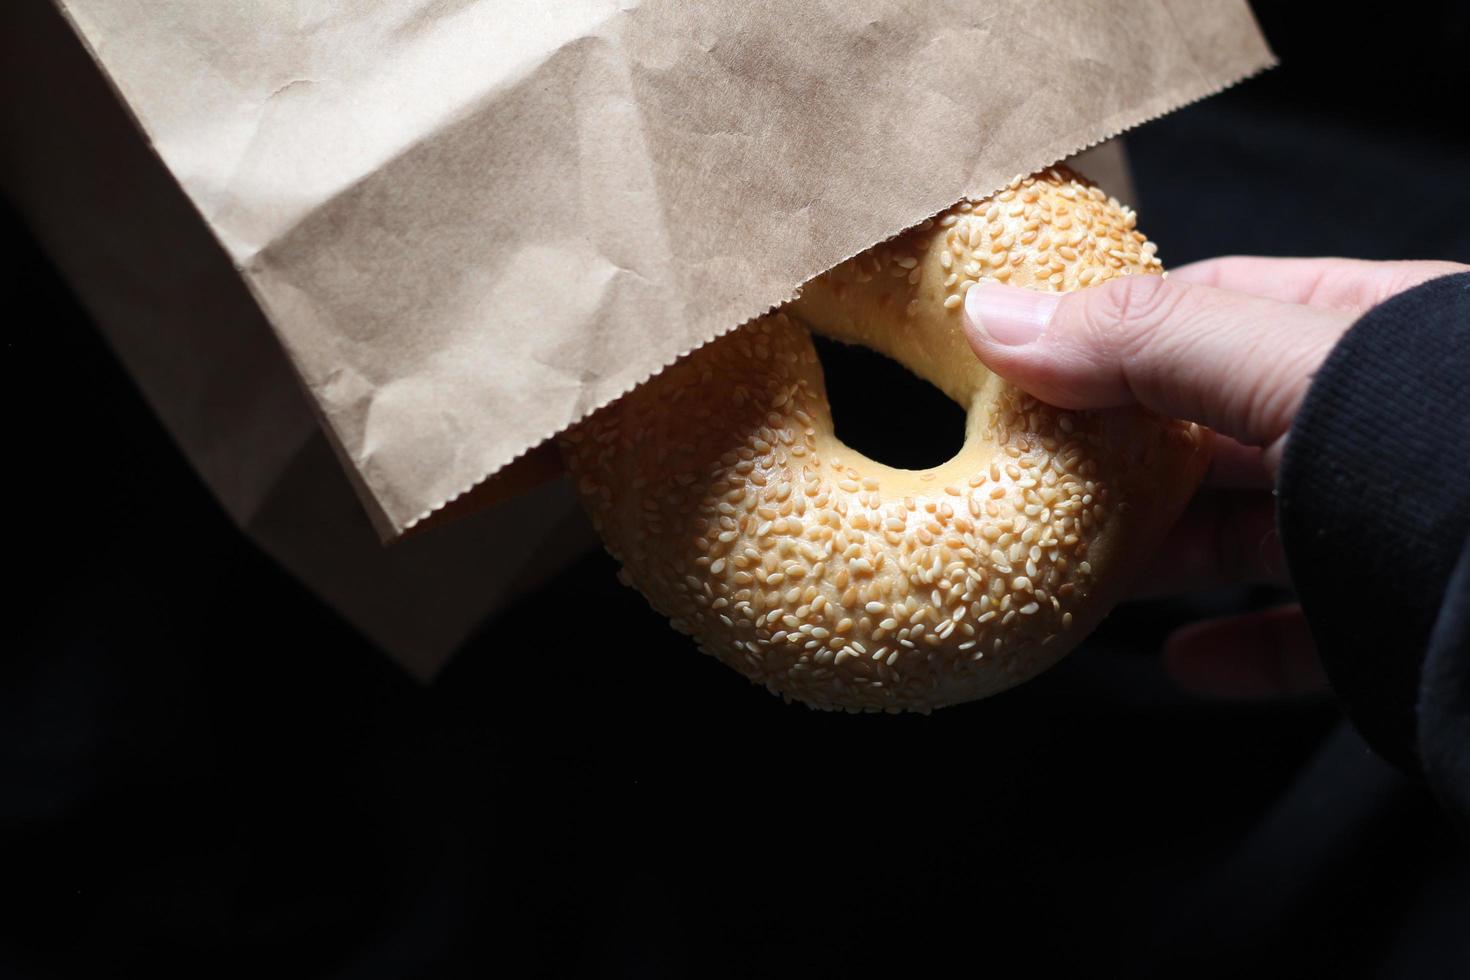 A man's hand is holding a bagel out of a brown paper bag. photo